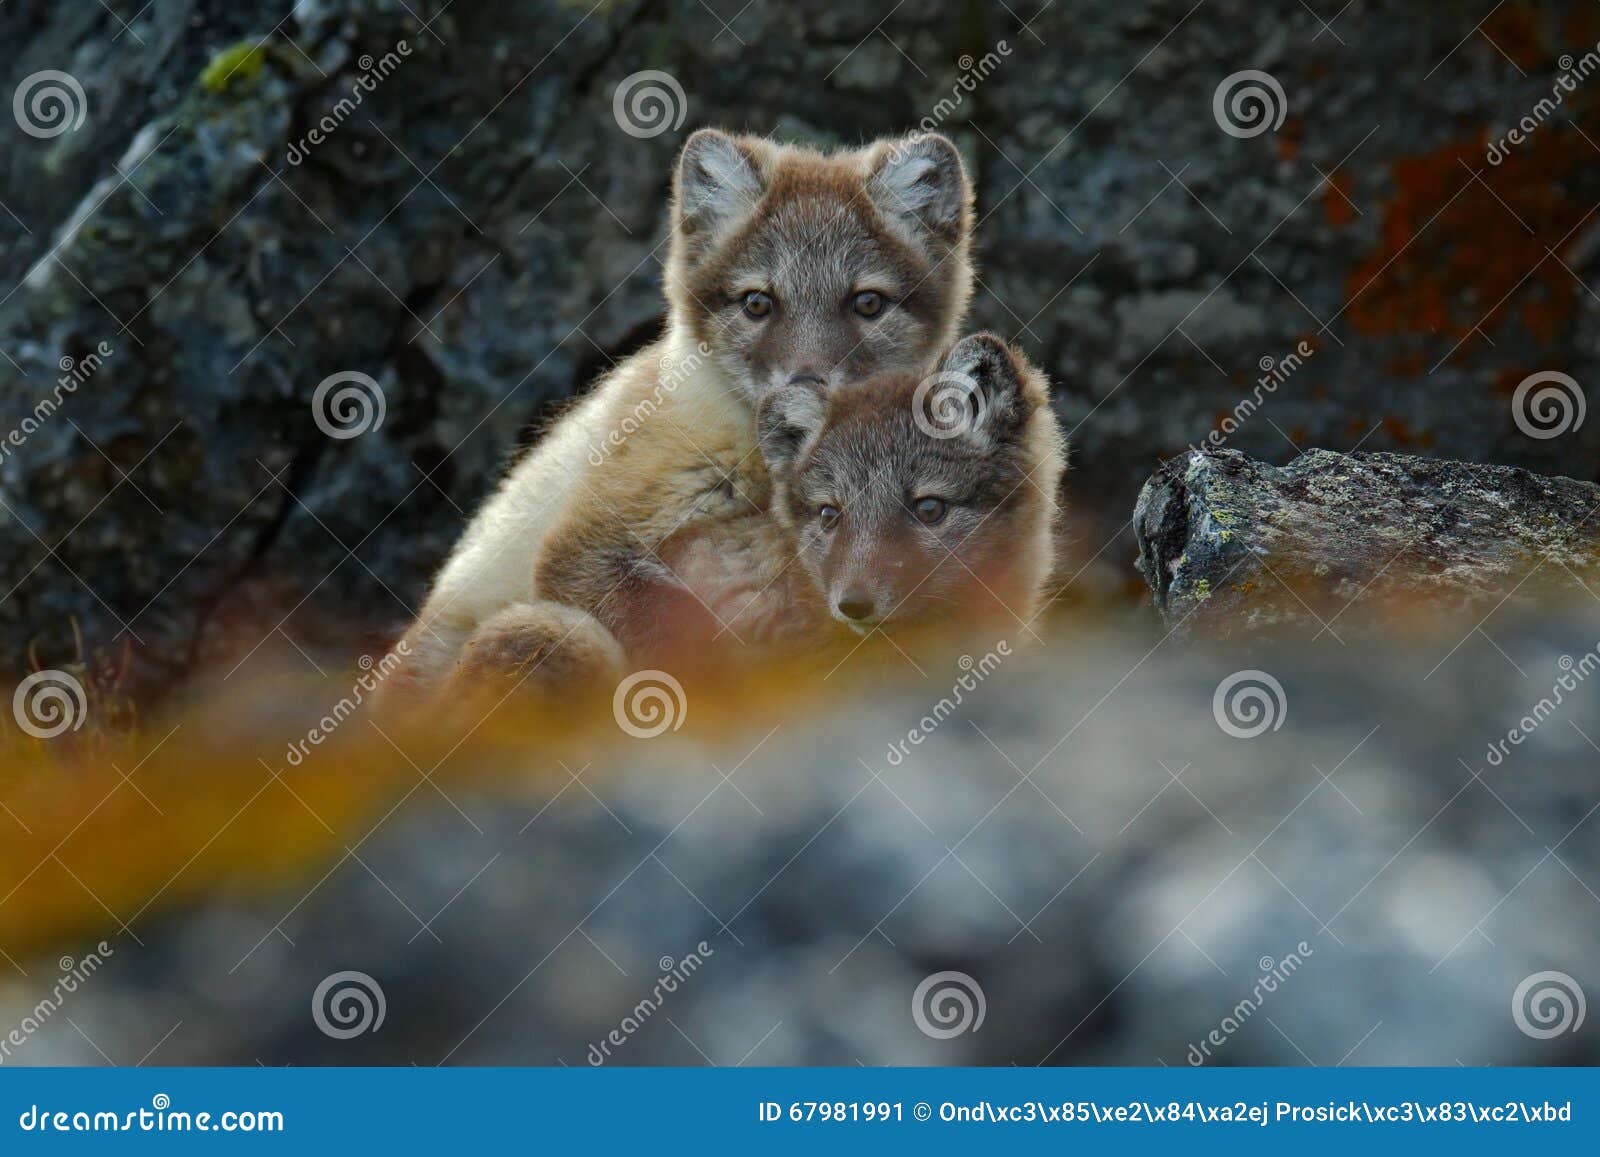 arctic fox, vulpes lagopus, two young, in the nature habitat, grass meadow with flowers, svalbard, norway